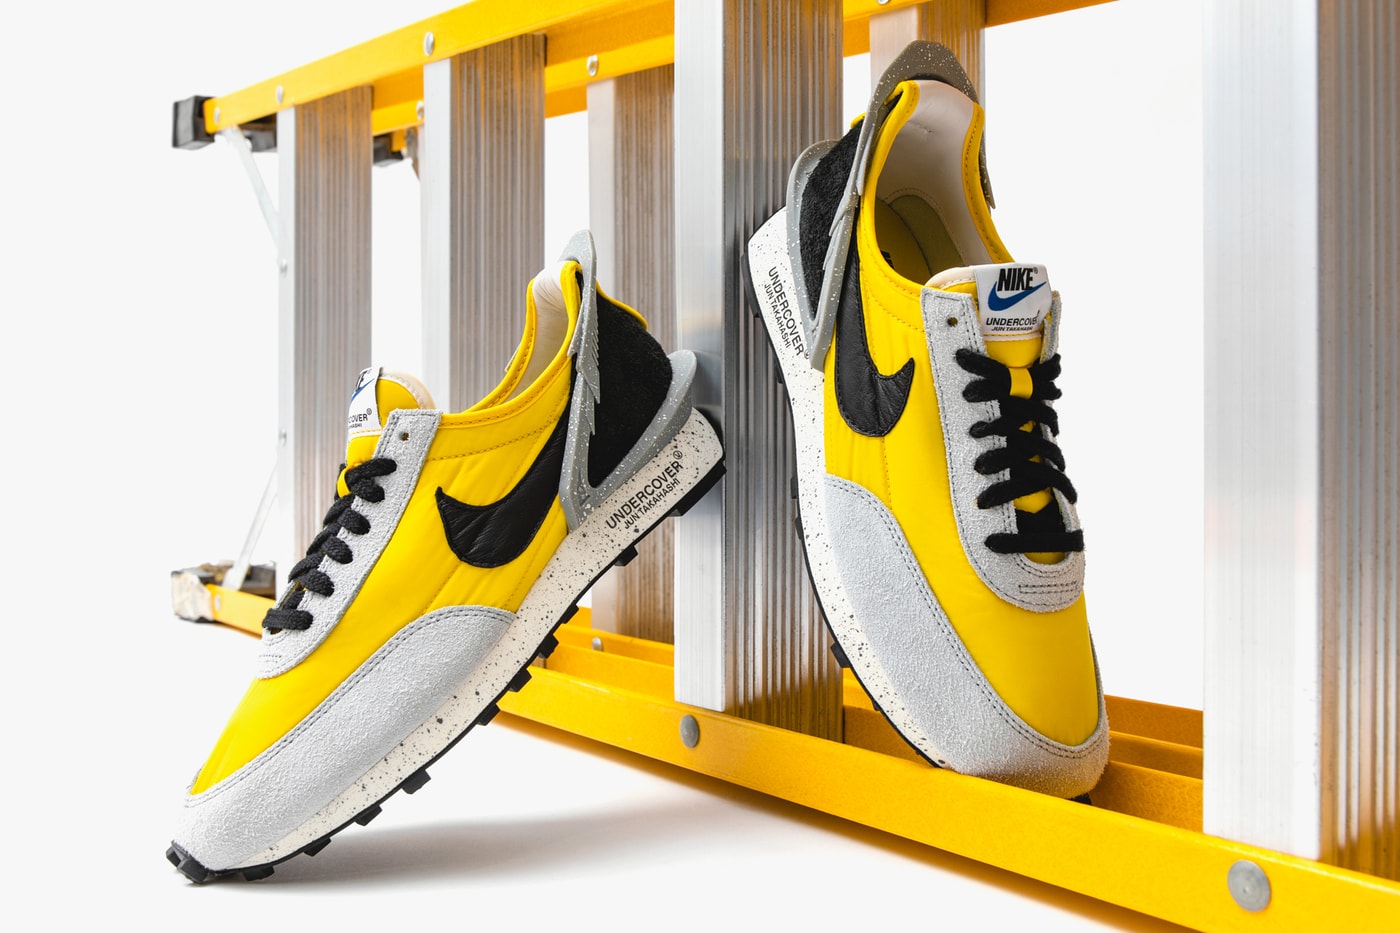 https%3A%2F%2Fhypebeast.com%2Fimage%2F2019%2F07%2Fundercover-nike-daybreak-sneaker-collaboration-closer-look-yellow-bright-citron-black-1.jpg